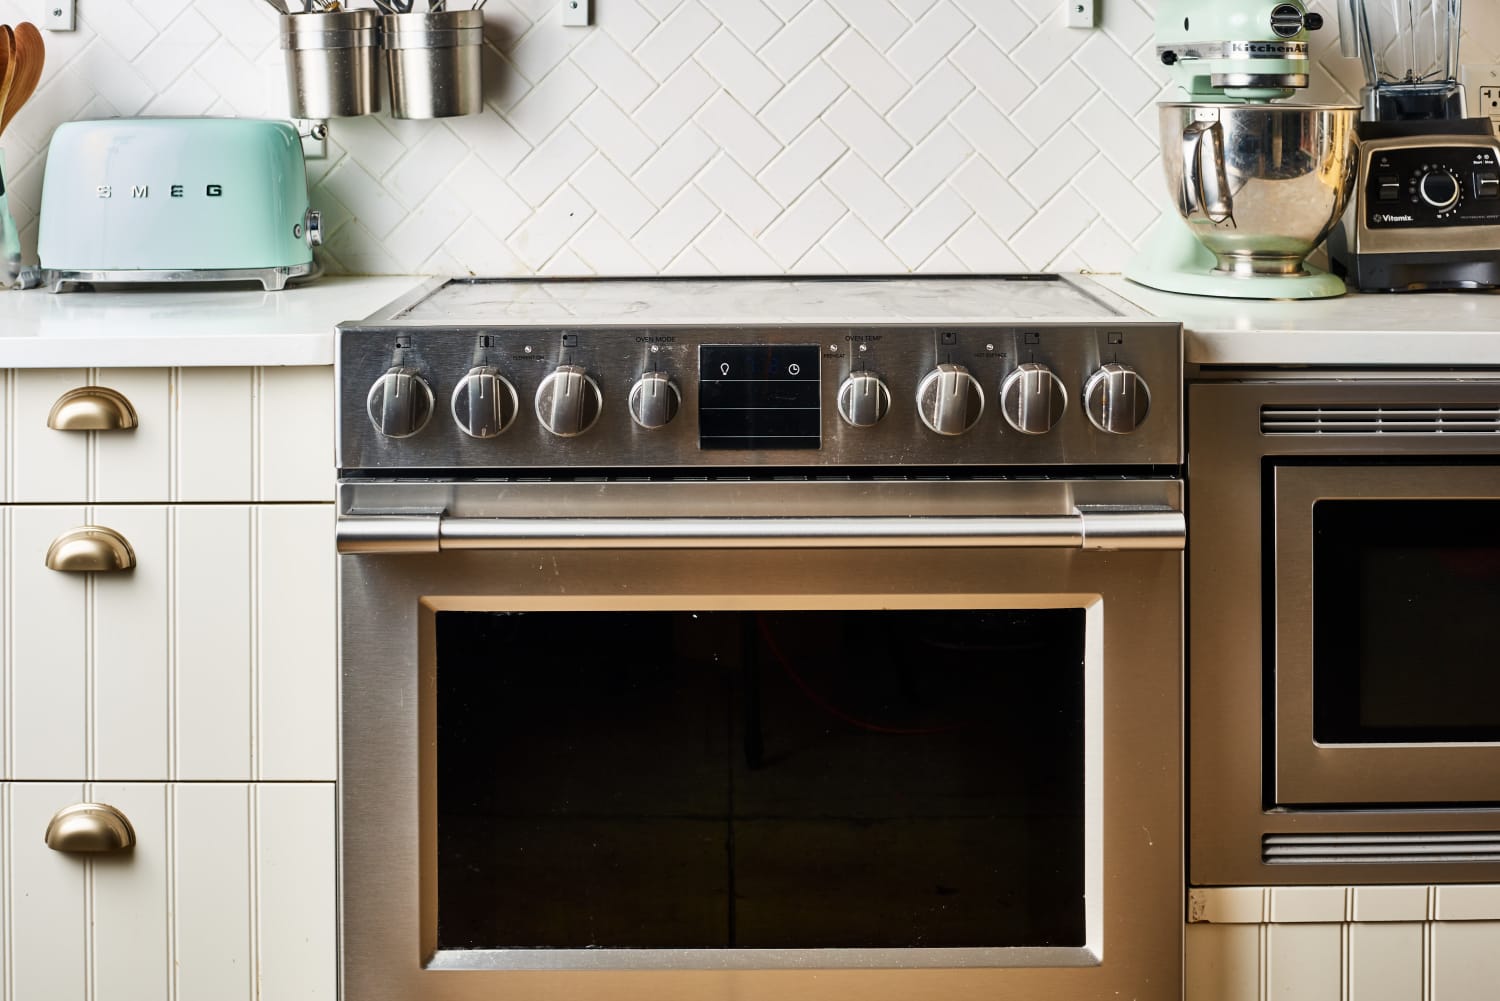 The Top 10 Ways to Make Your Oven Cleaner (and Just Way Better)